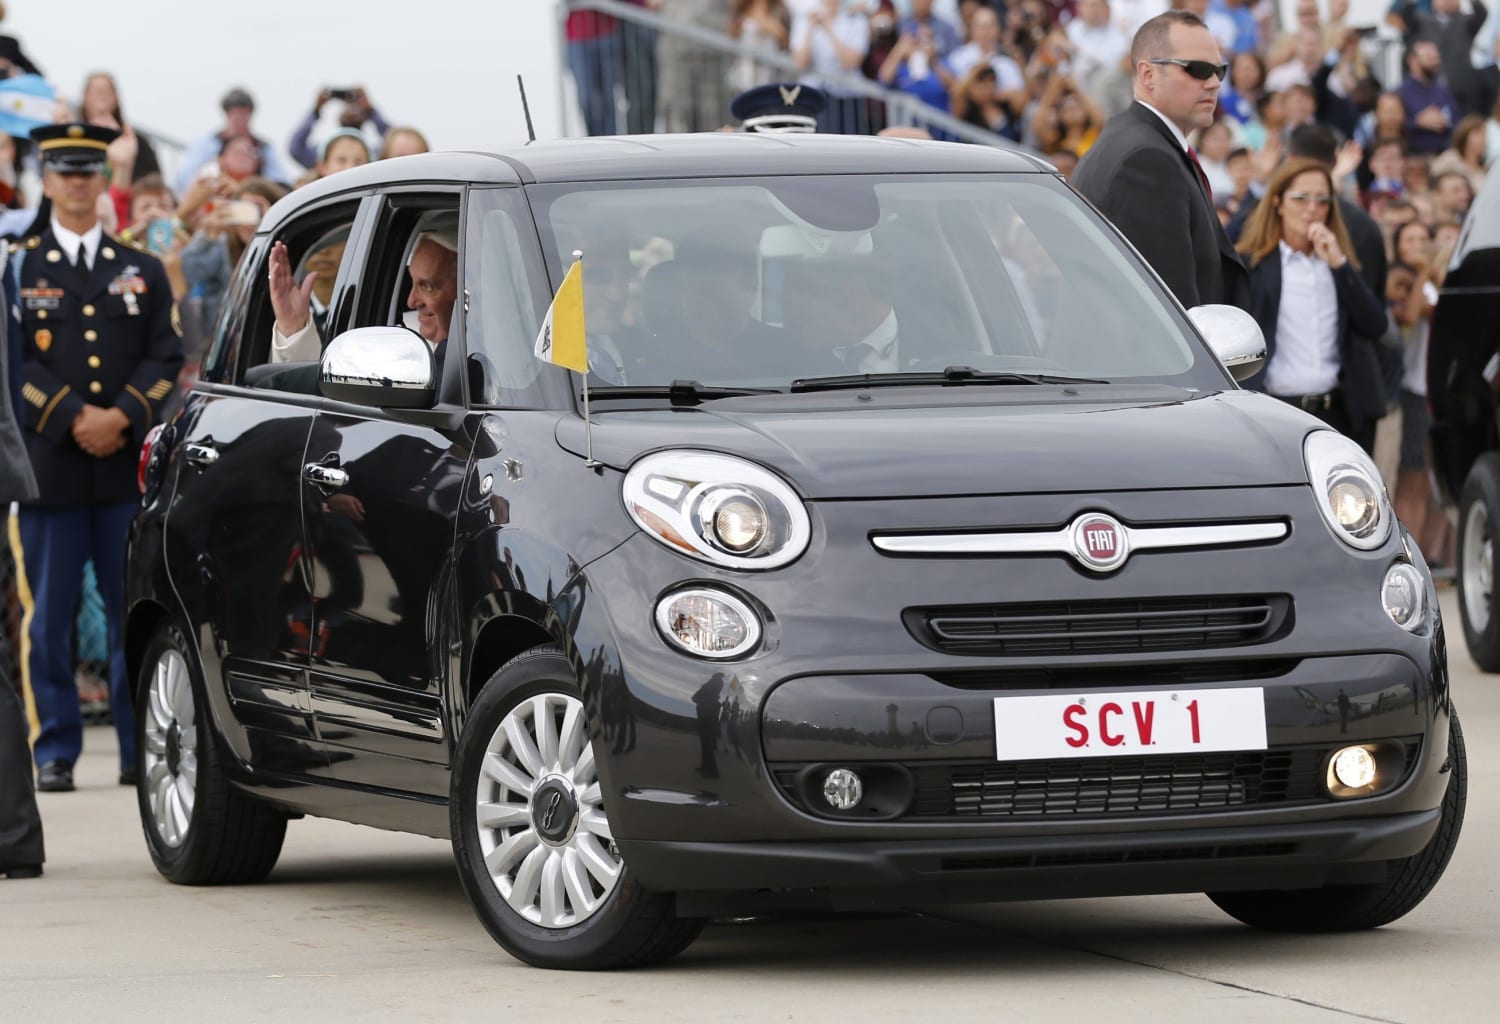 Fiat 500 L from Pope America to be in Philadelphia